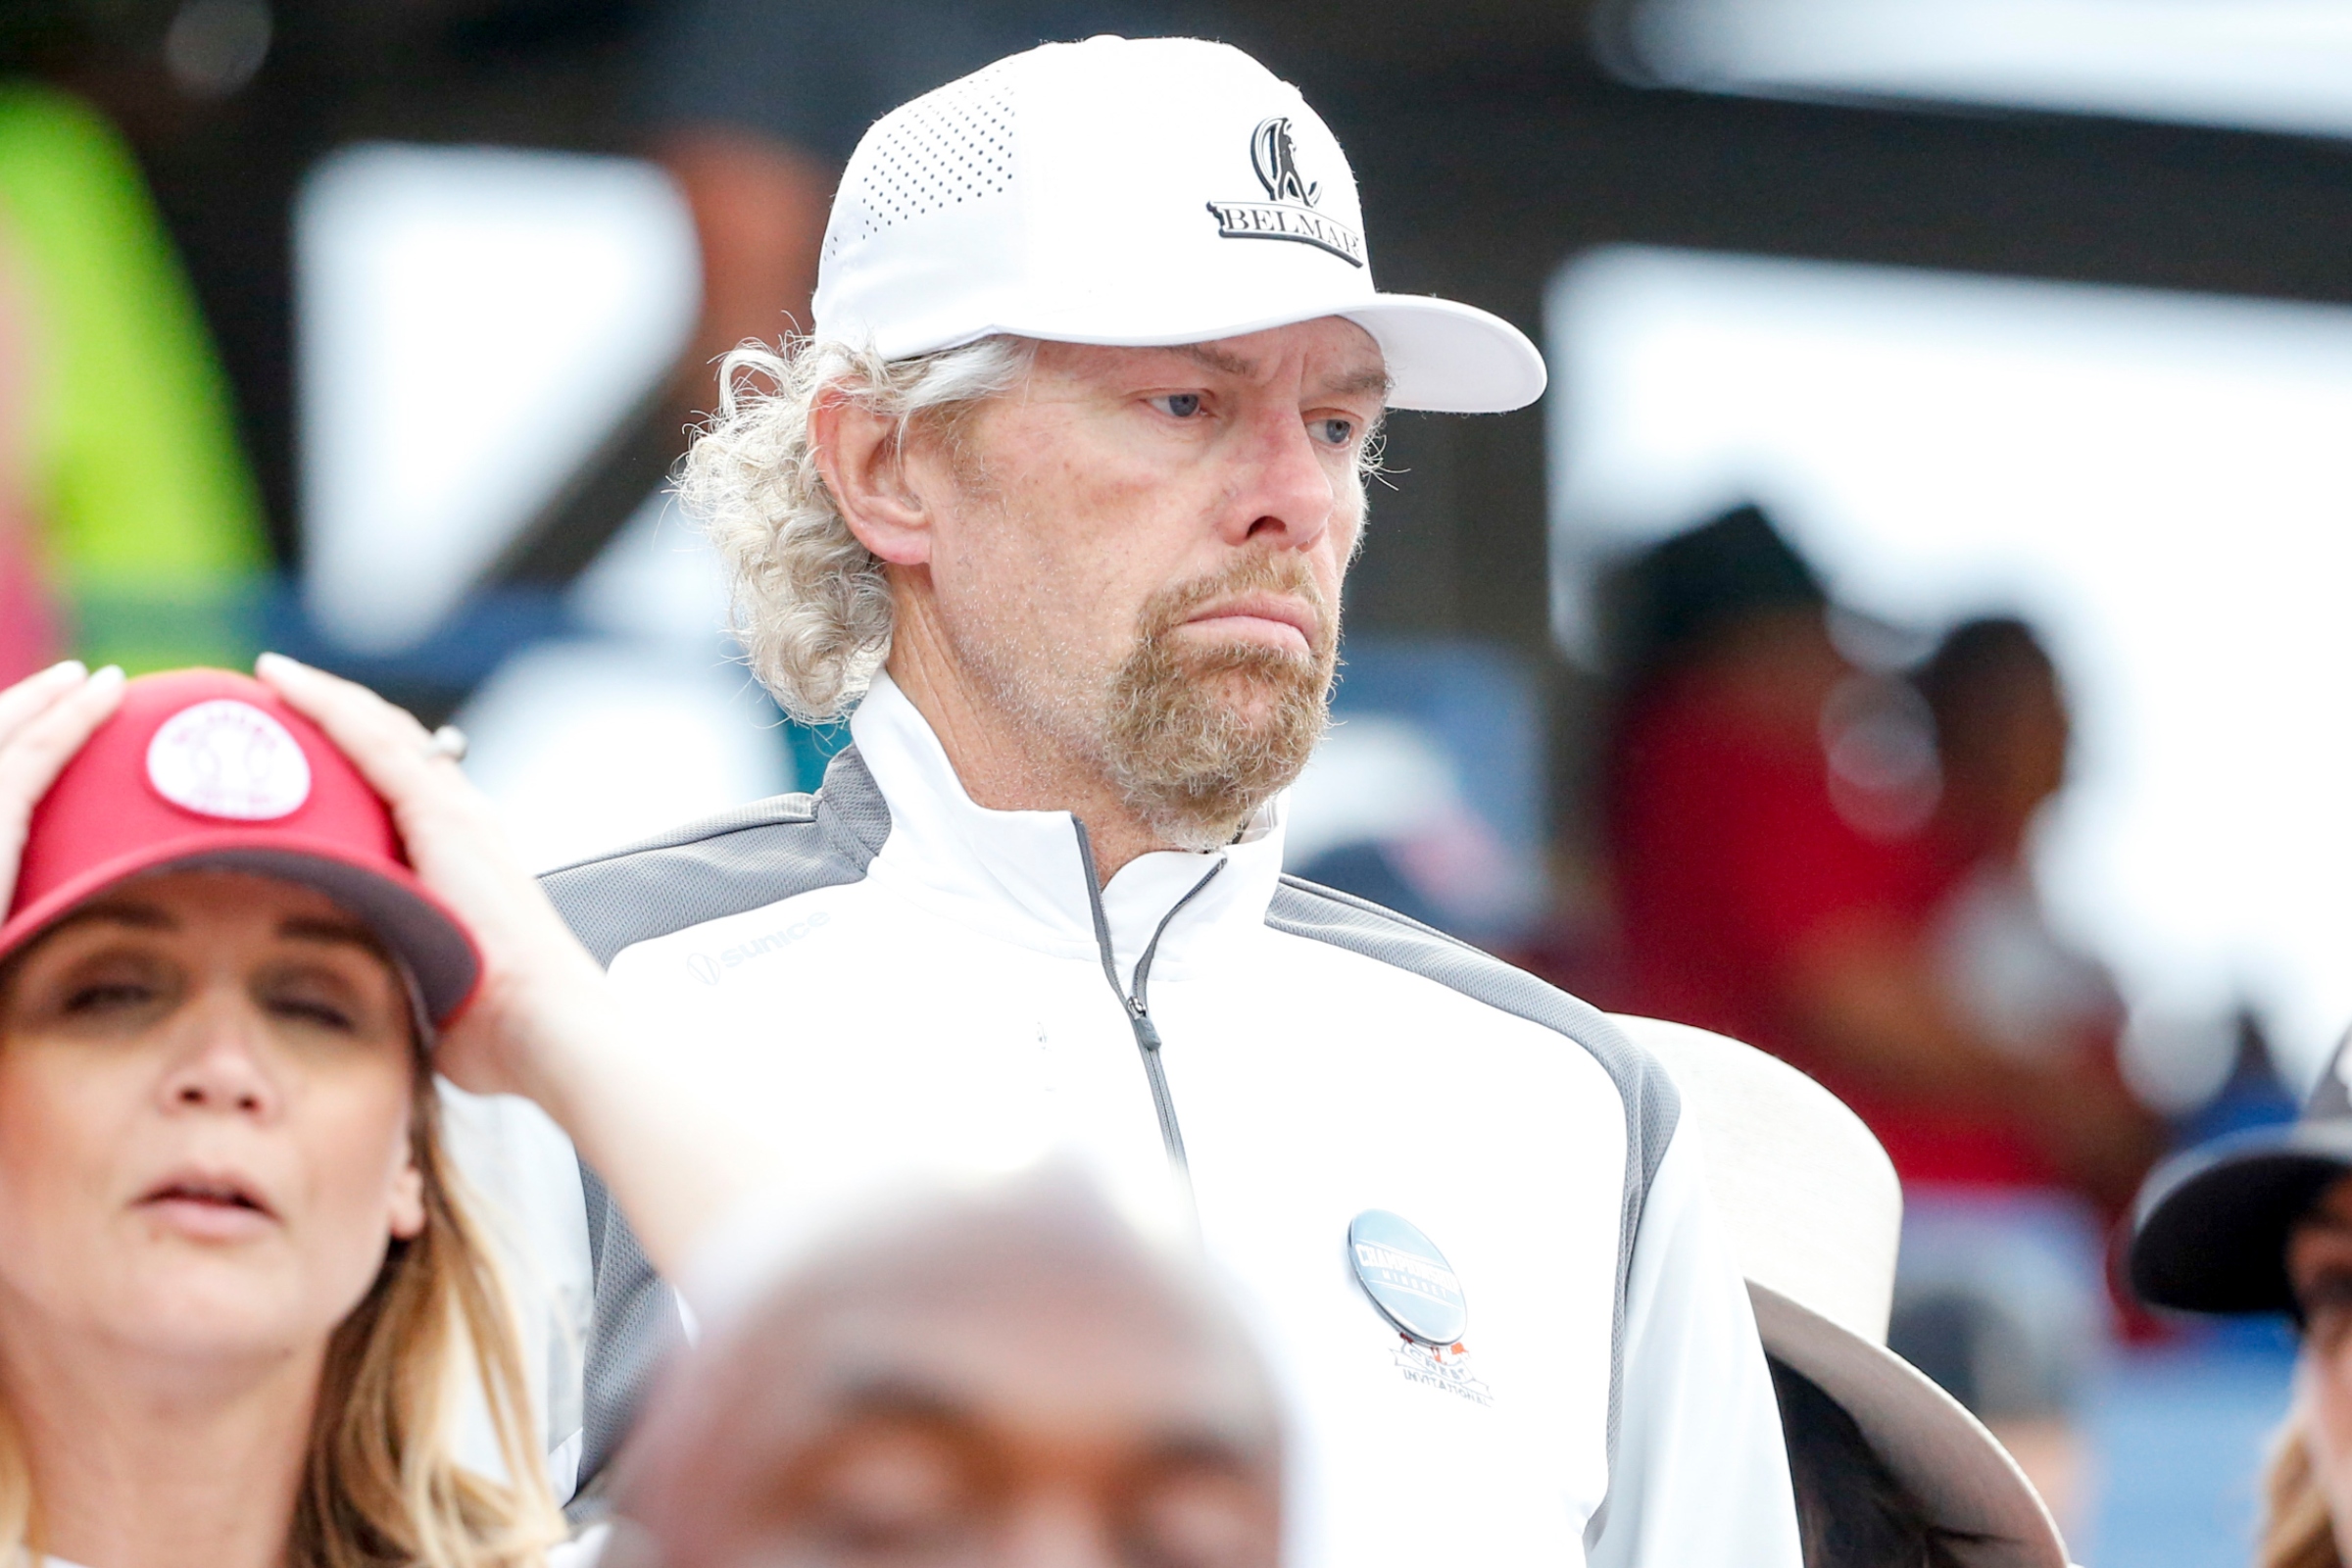 Toby Keith shares update on stomach cancer battle